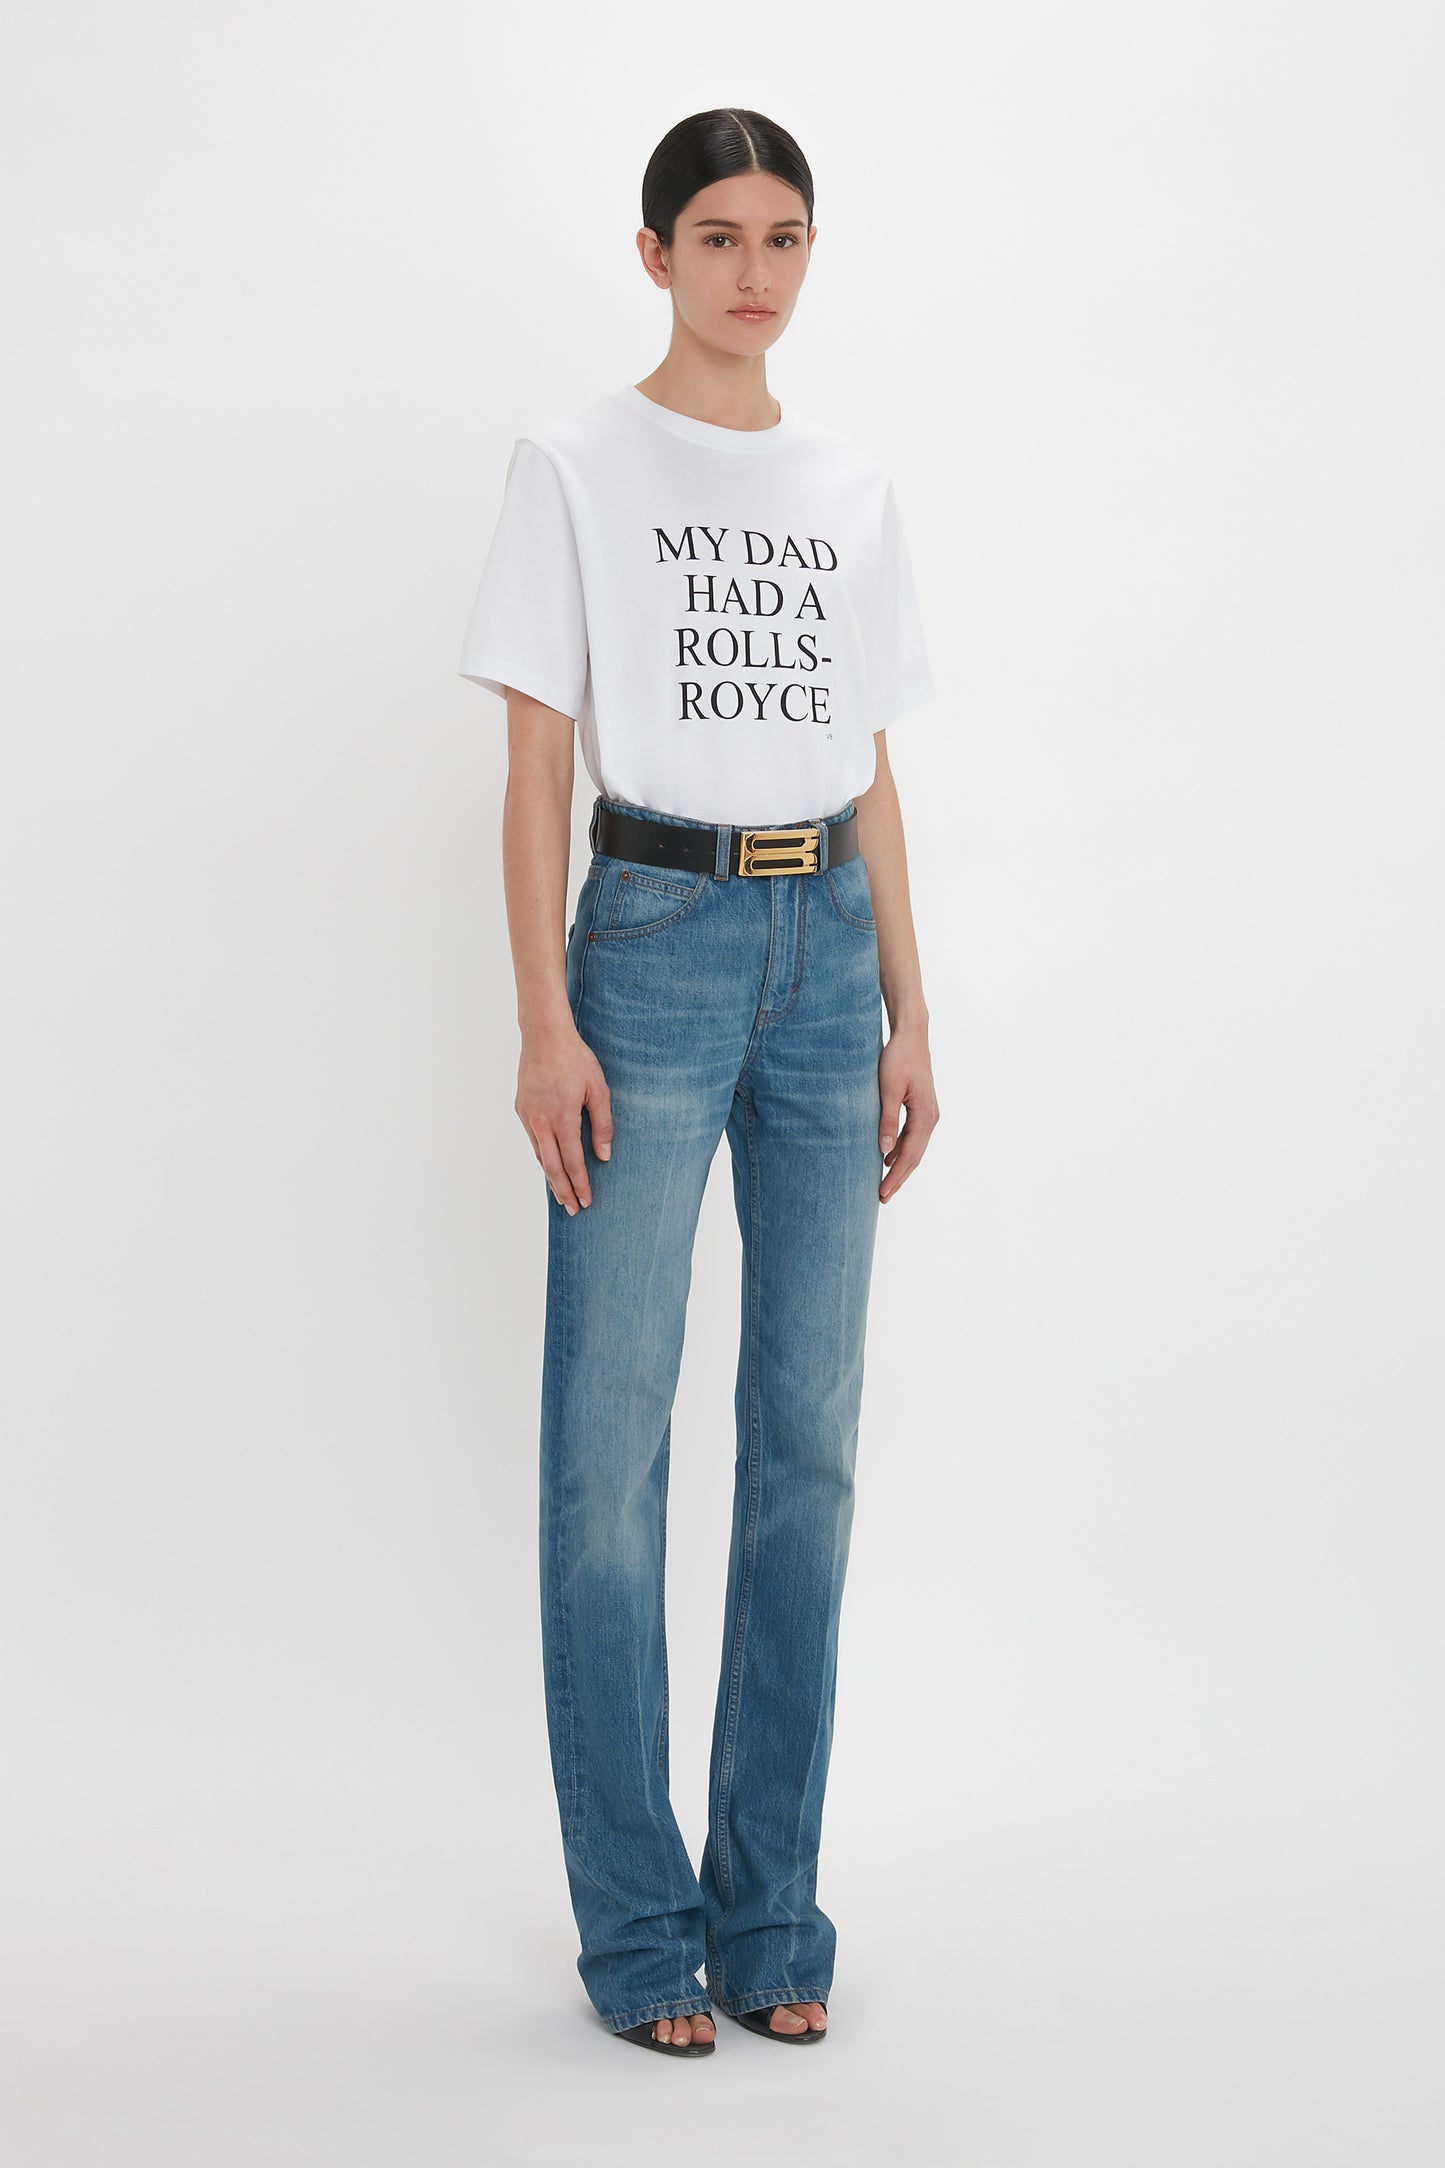 A woman wearing Victoria Beckham's Julia Jean In Broken Vintage Wash high waist jeans and a white t-shirt that reads "my dad had a rolls-royce" standing against a white background.